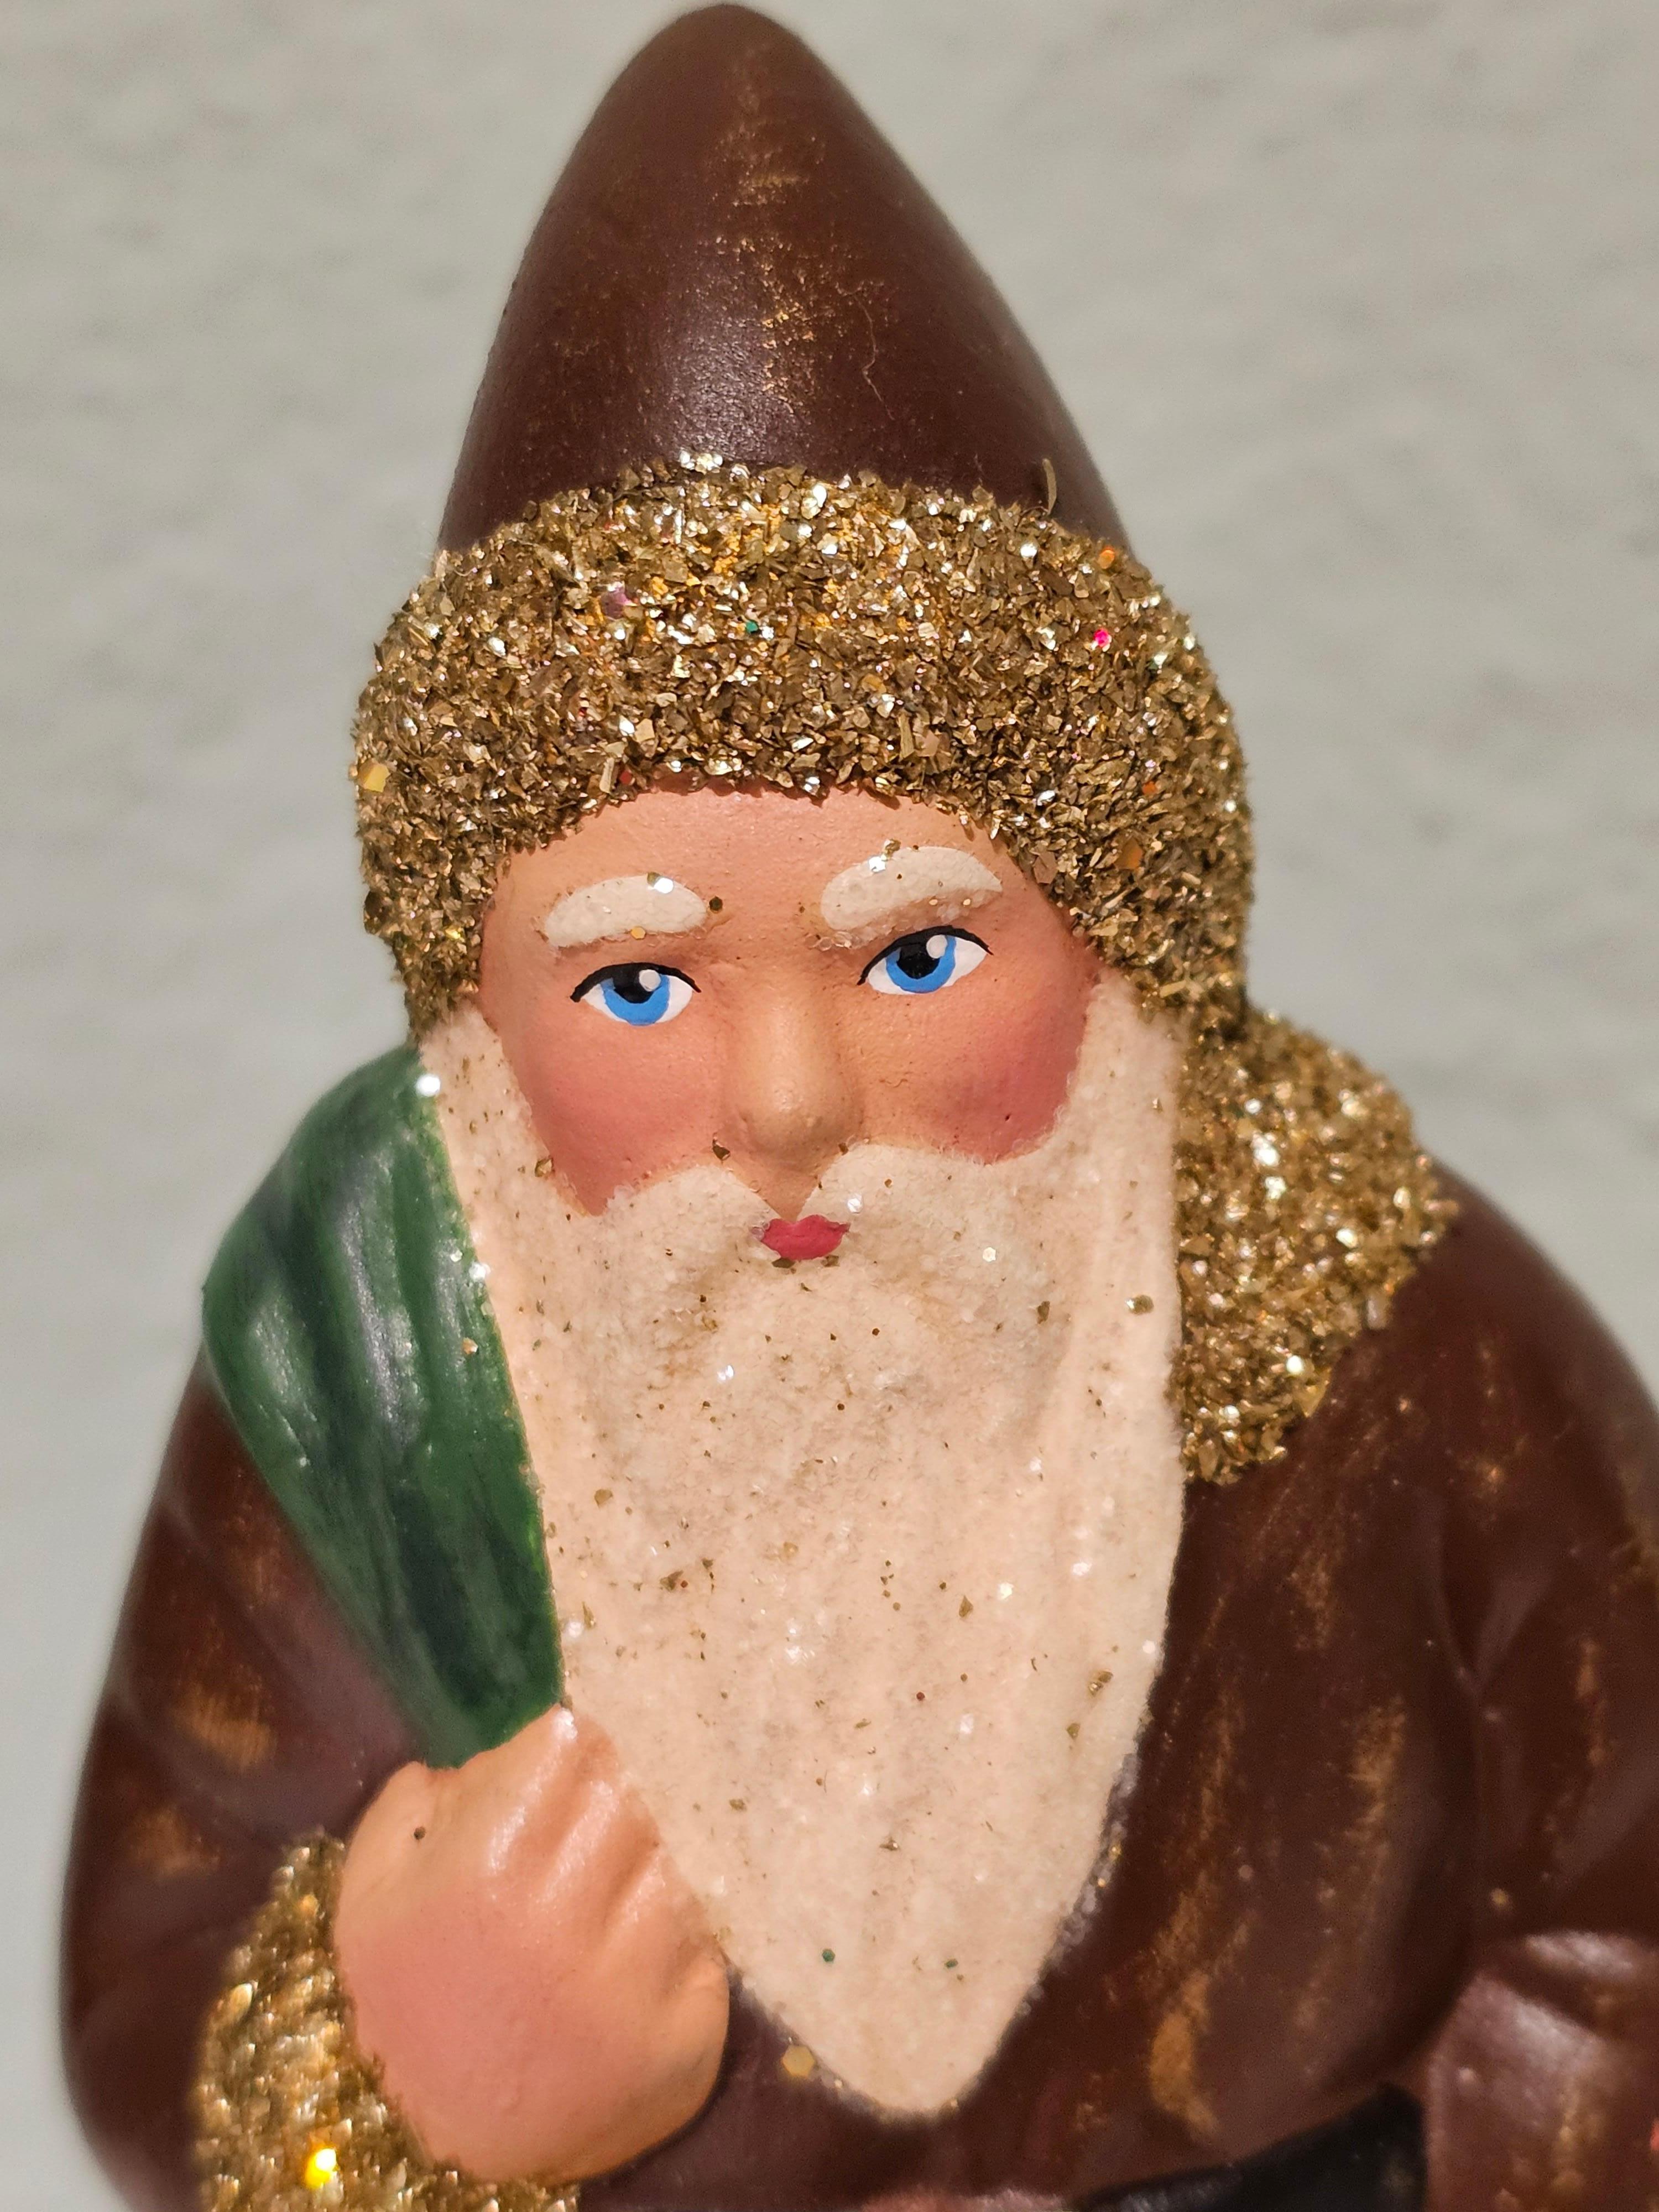 German Santa Claus figure made in papier-mâché with a hand painted detailed face. Holding a nicholas sack and decorated with golden glitter details.
The Santa Claus is handmade in the original antique mold in Germany.